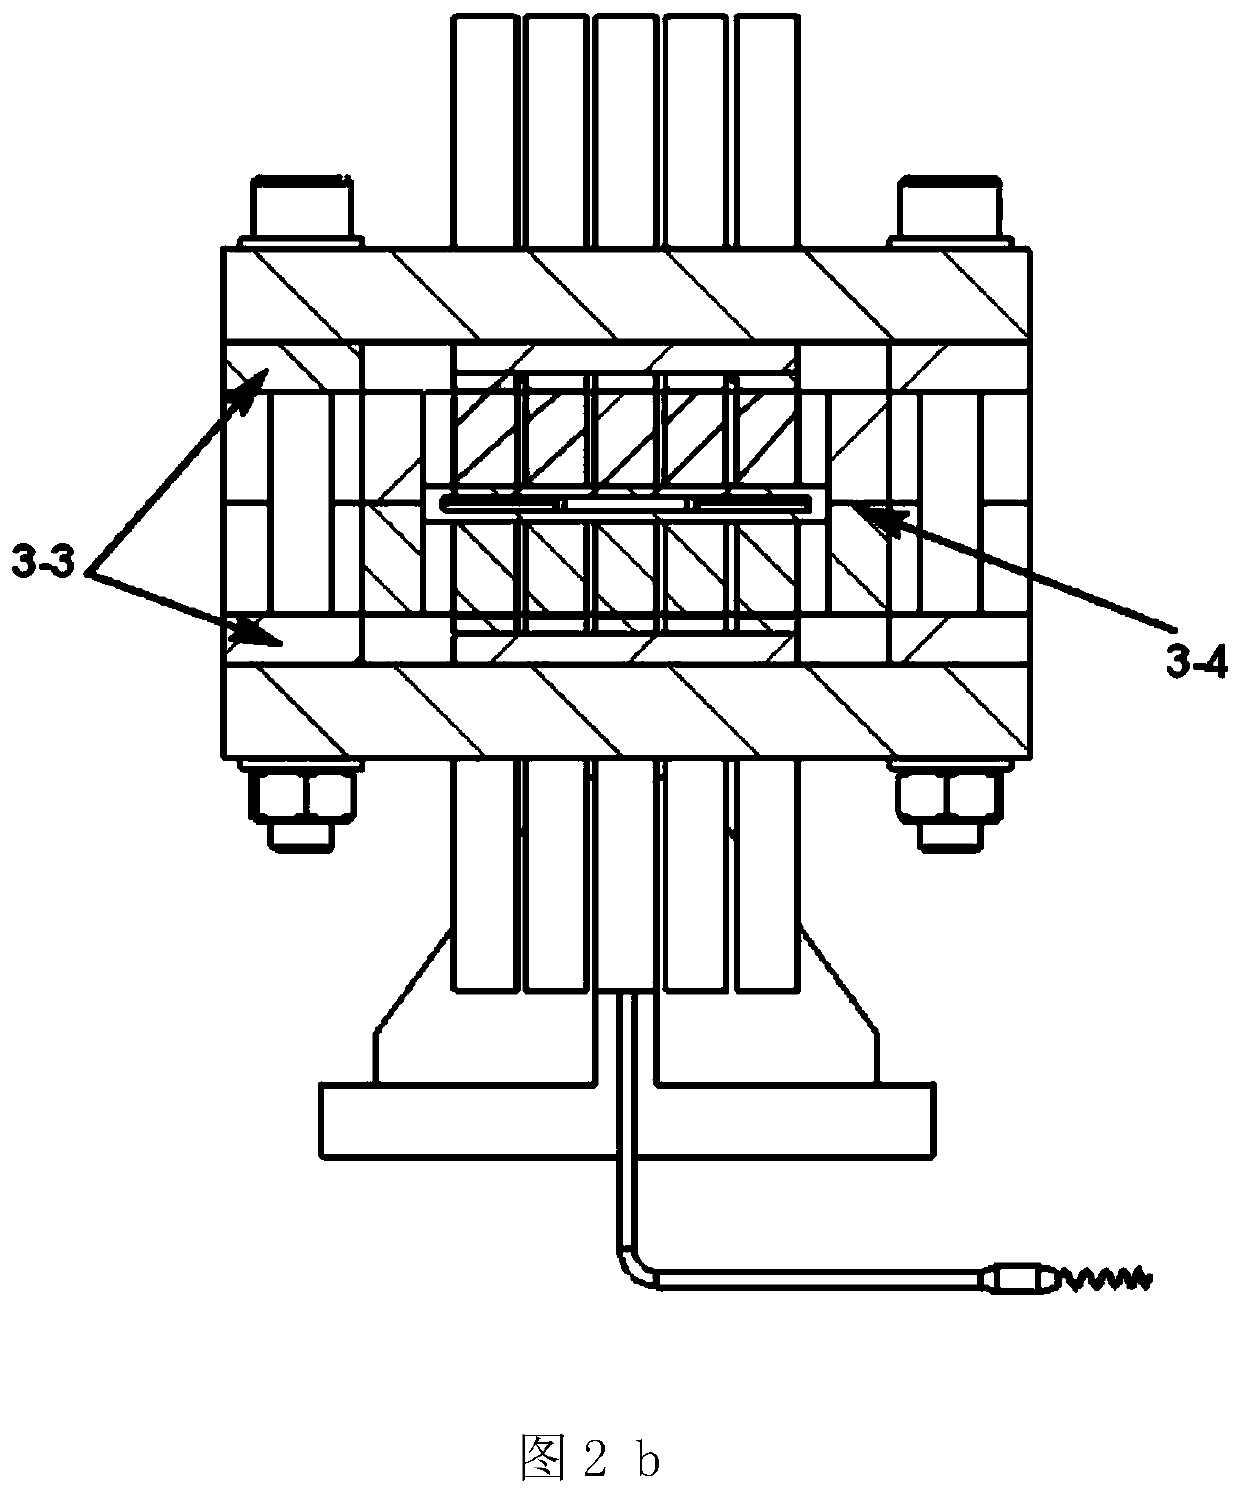 A test device for flow and heat transfer characteristics of a transverse non-uniform indirect heating rectangular channel